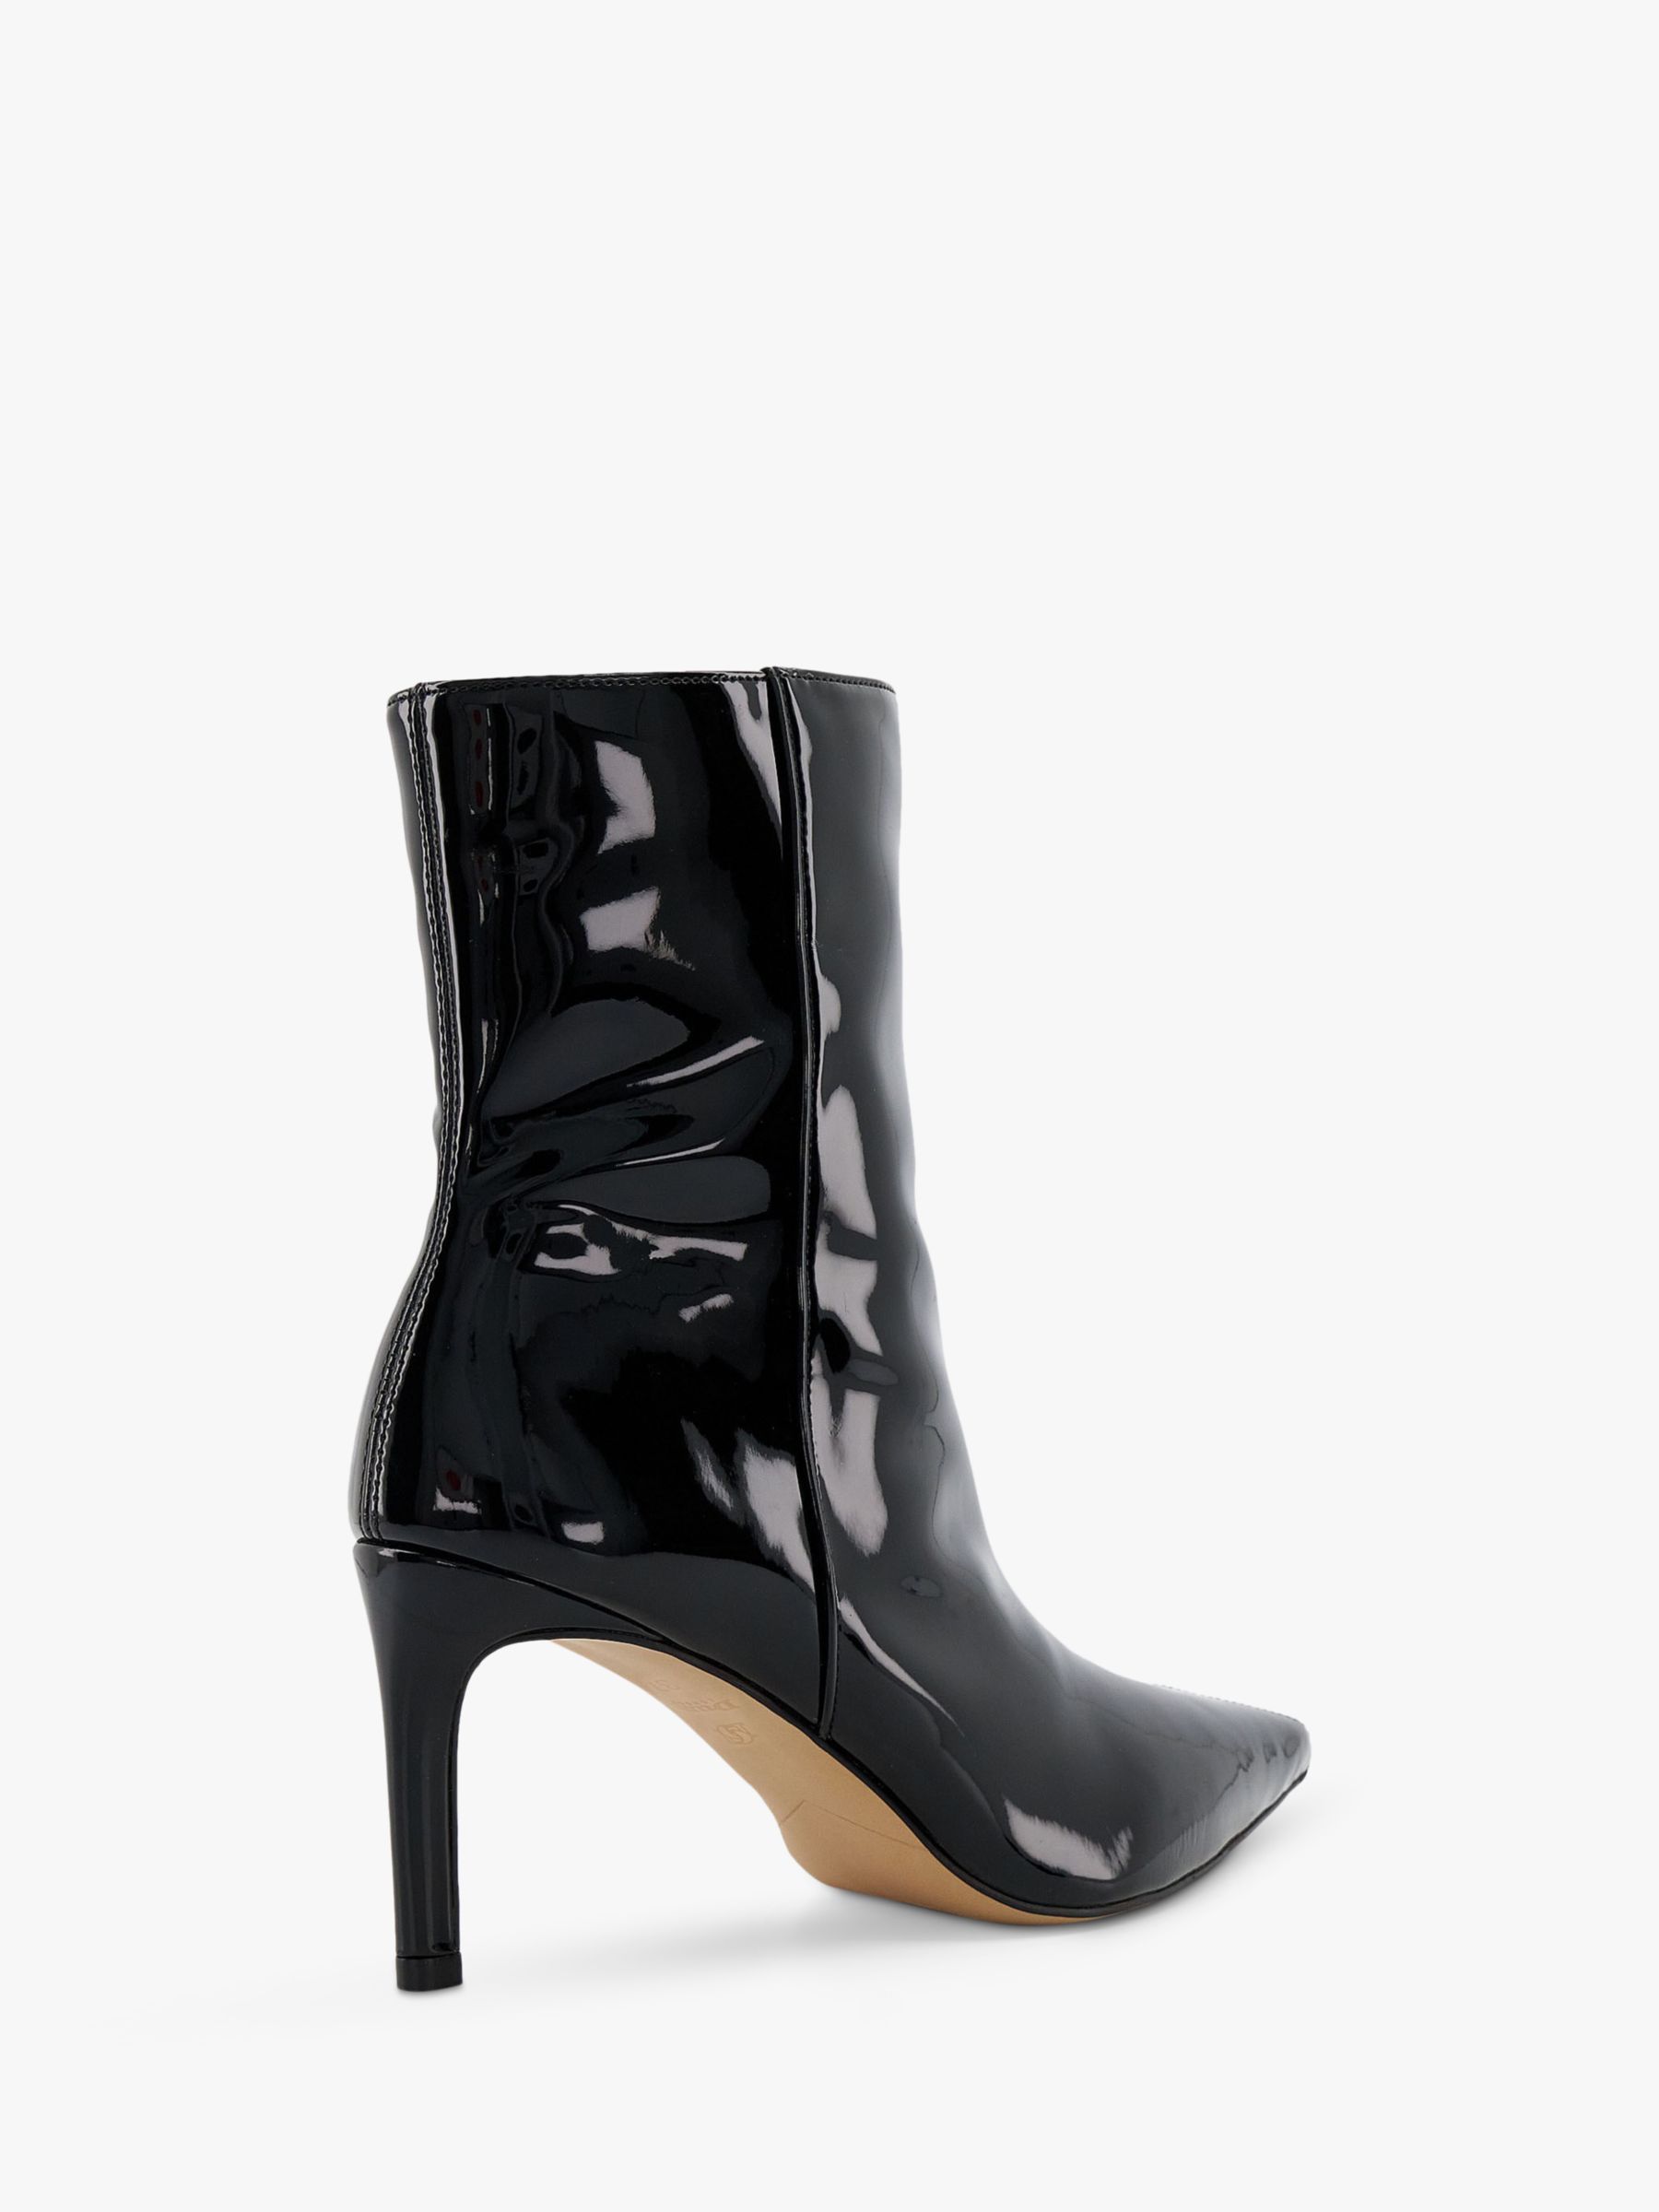 Dune Olexi Patent Ankle Boots, Black at John Lewis & Partners